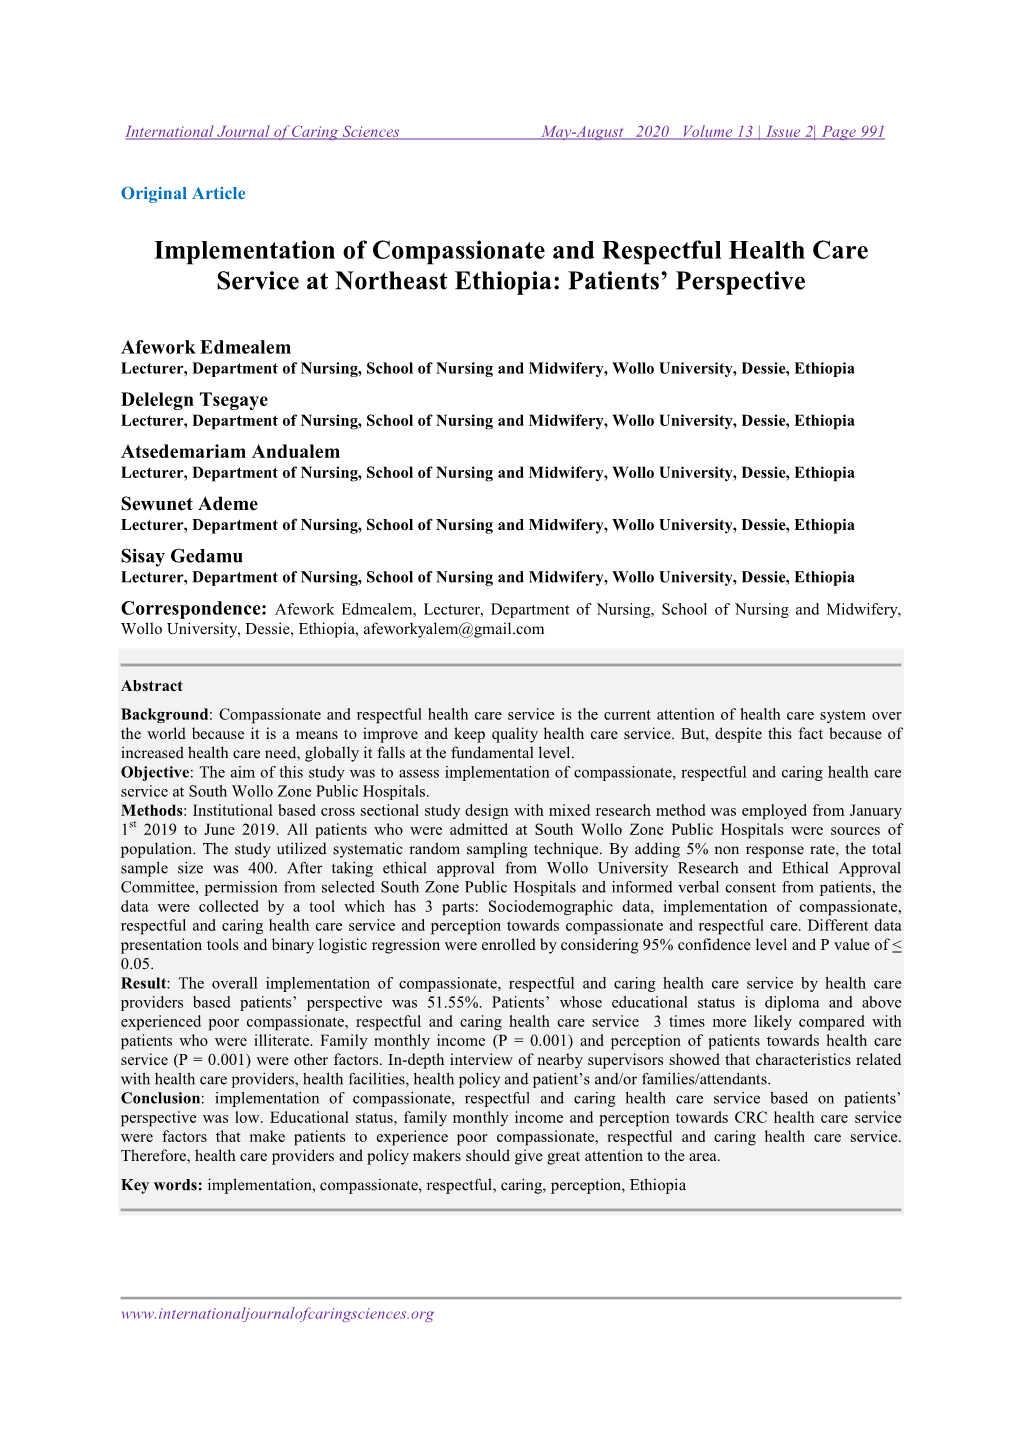 Implementation of Compassionate and Respectful Health Care Service at Northeast Ethiopia: Patients’ Perspective